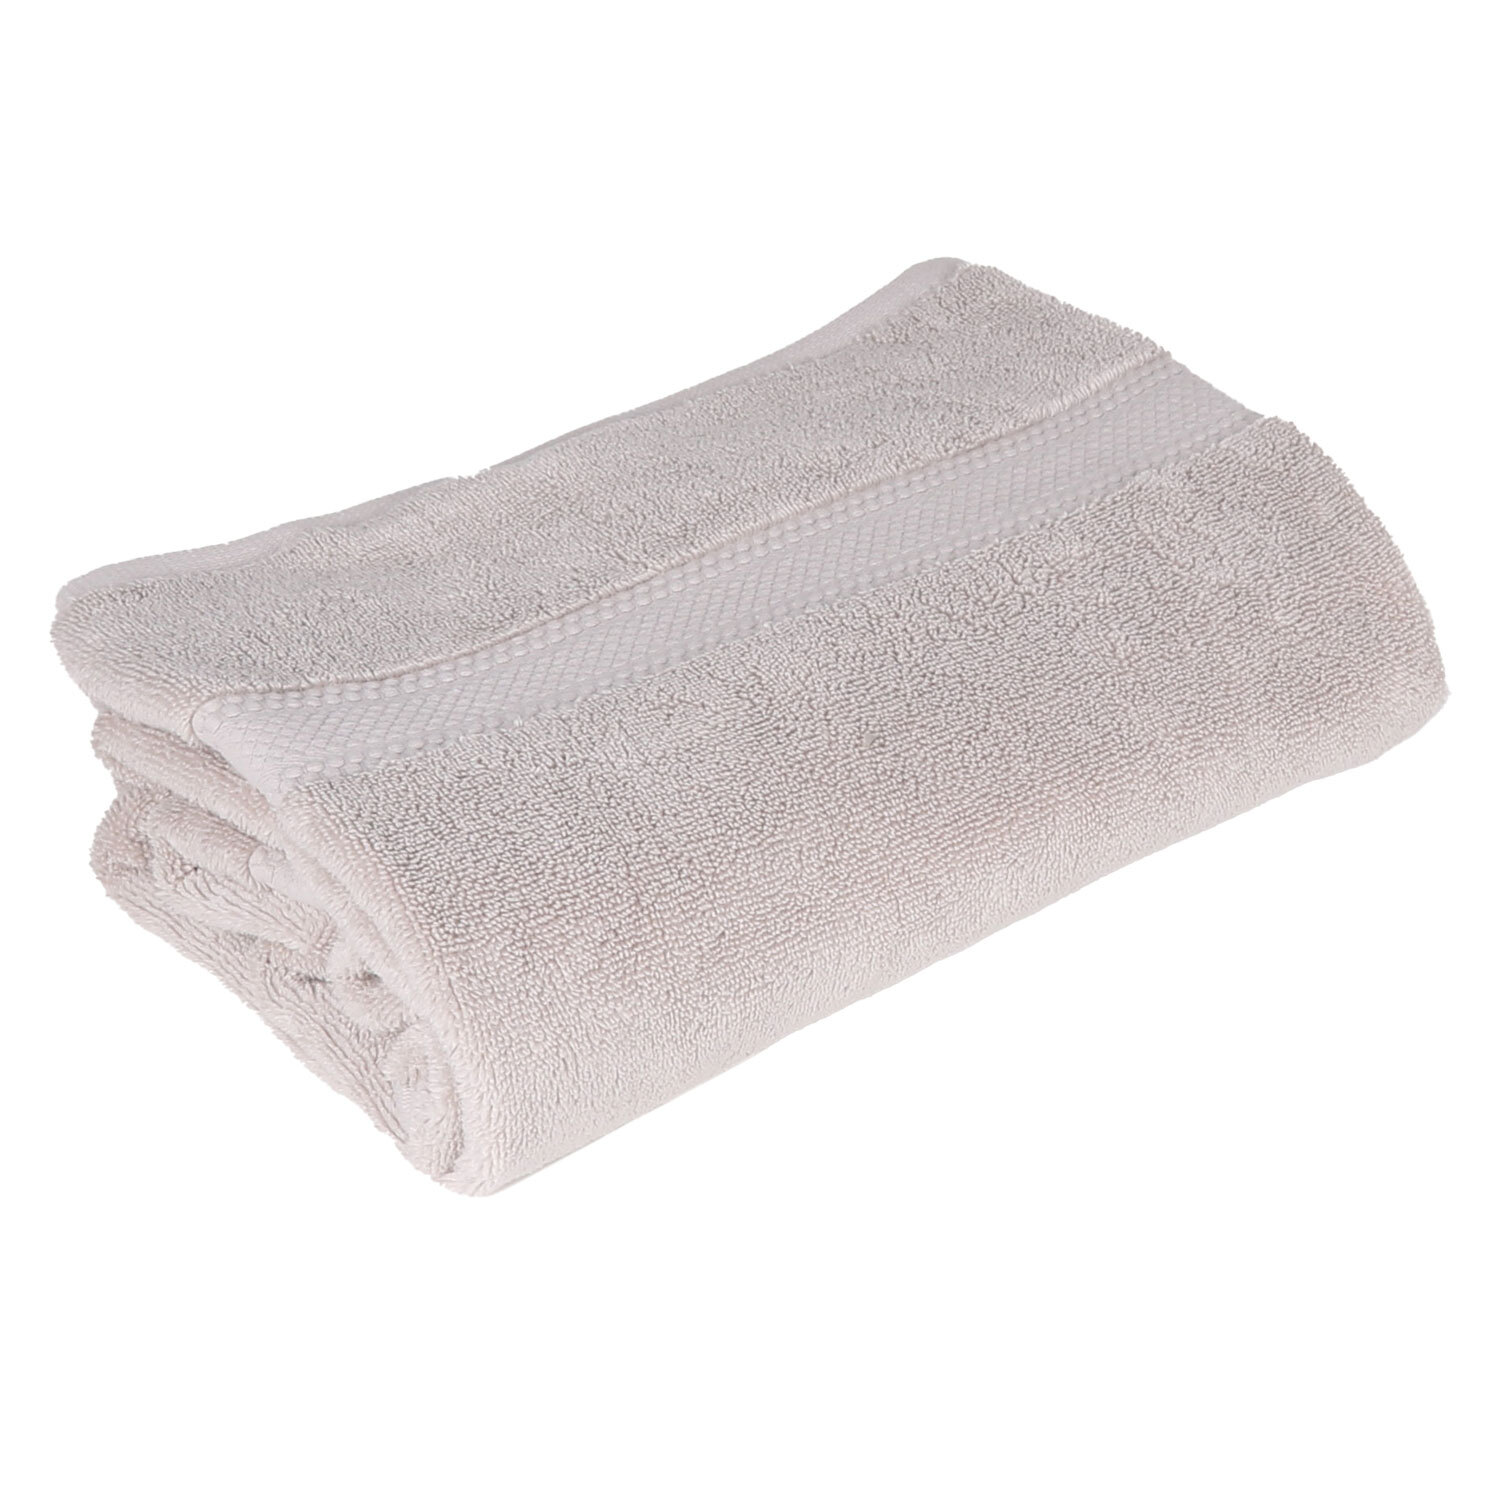 Deluxe Hand Towel - Natural Stone Image